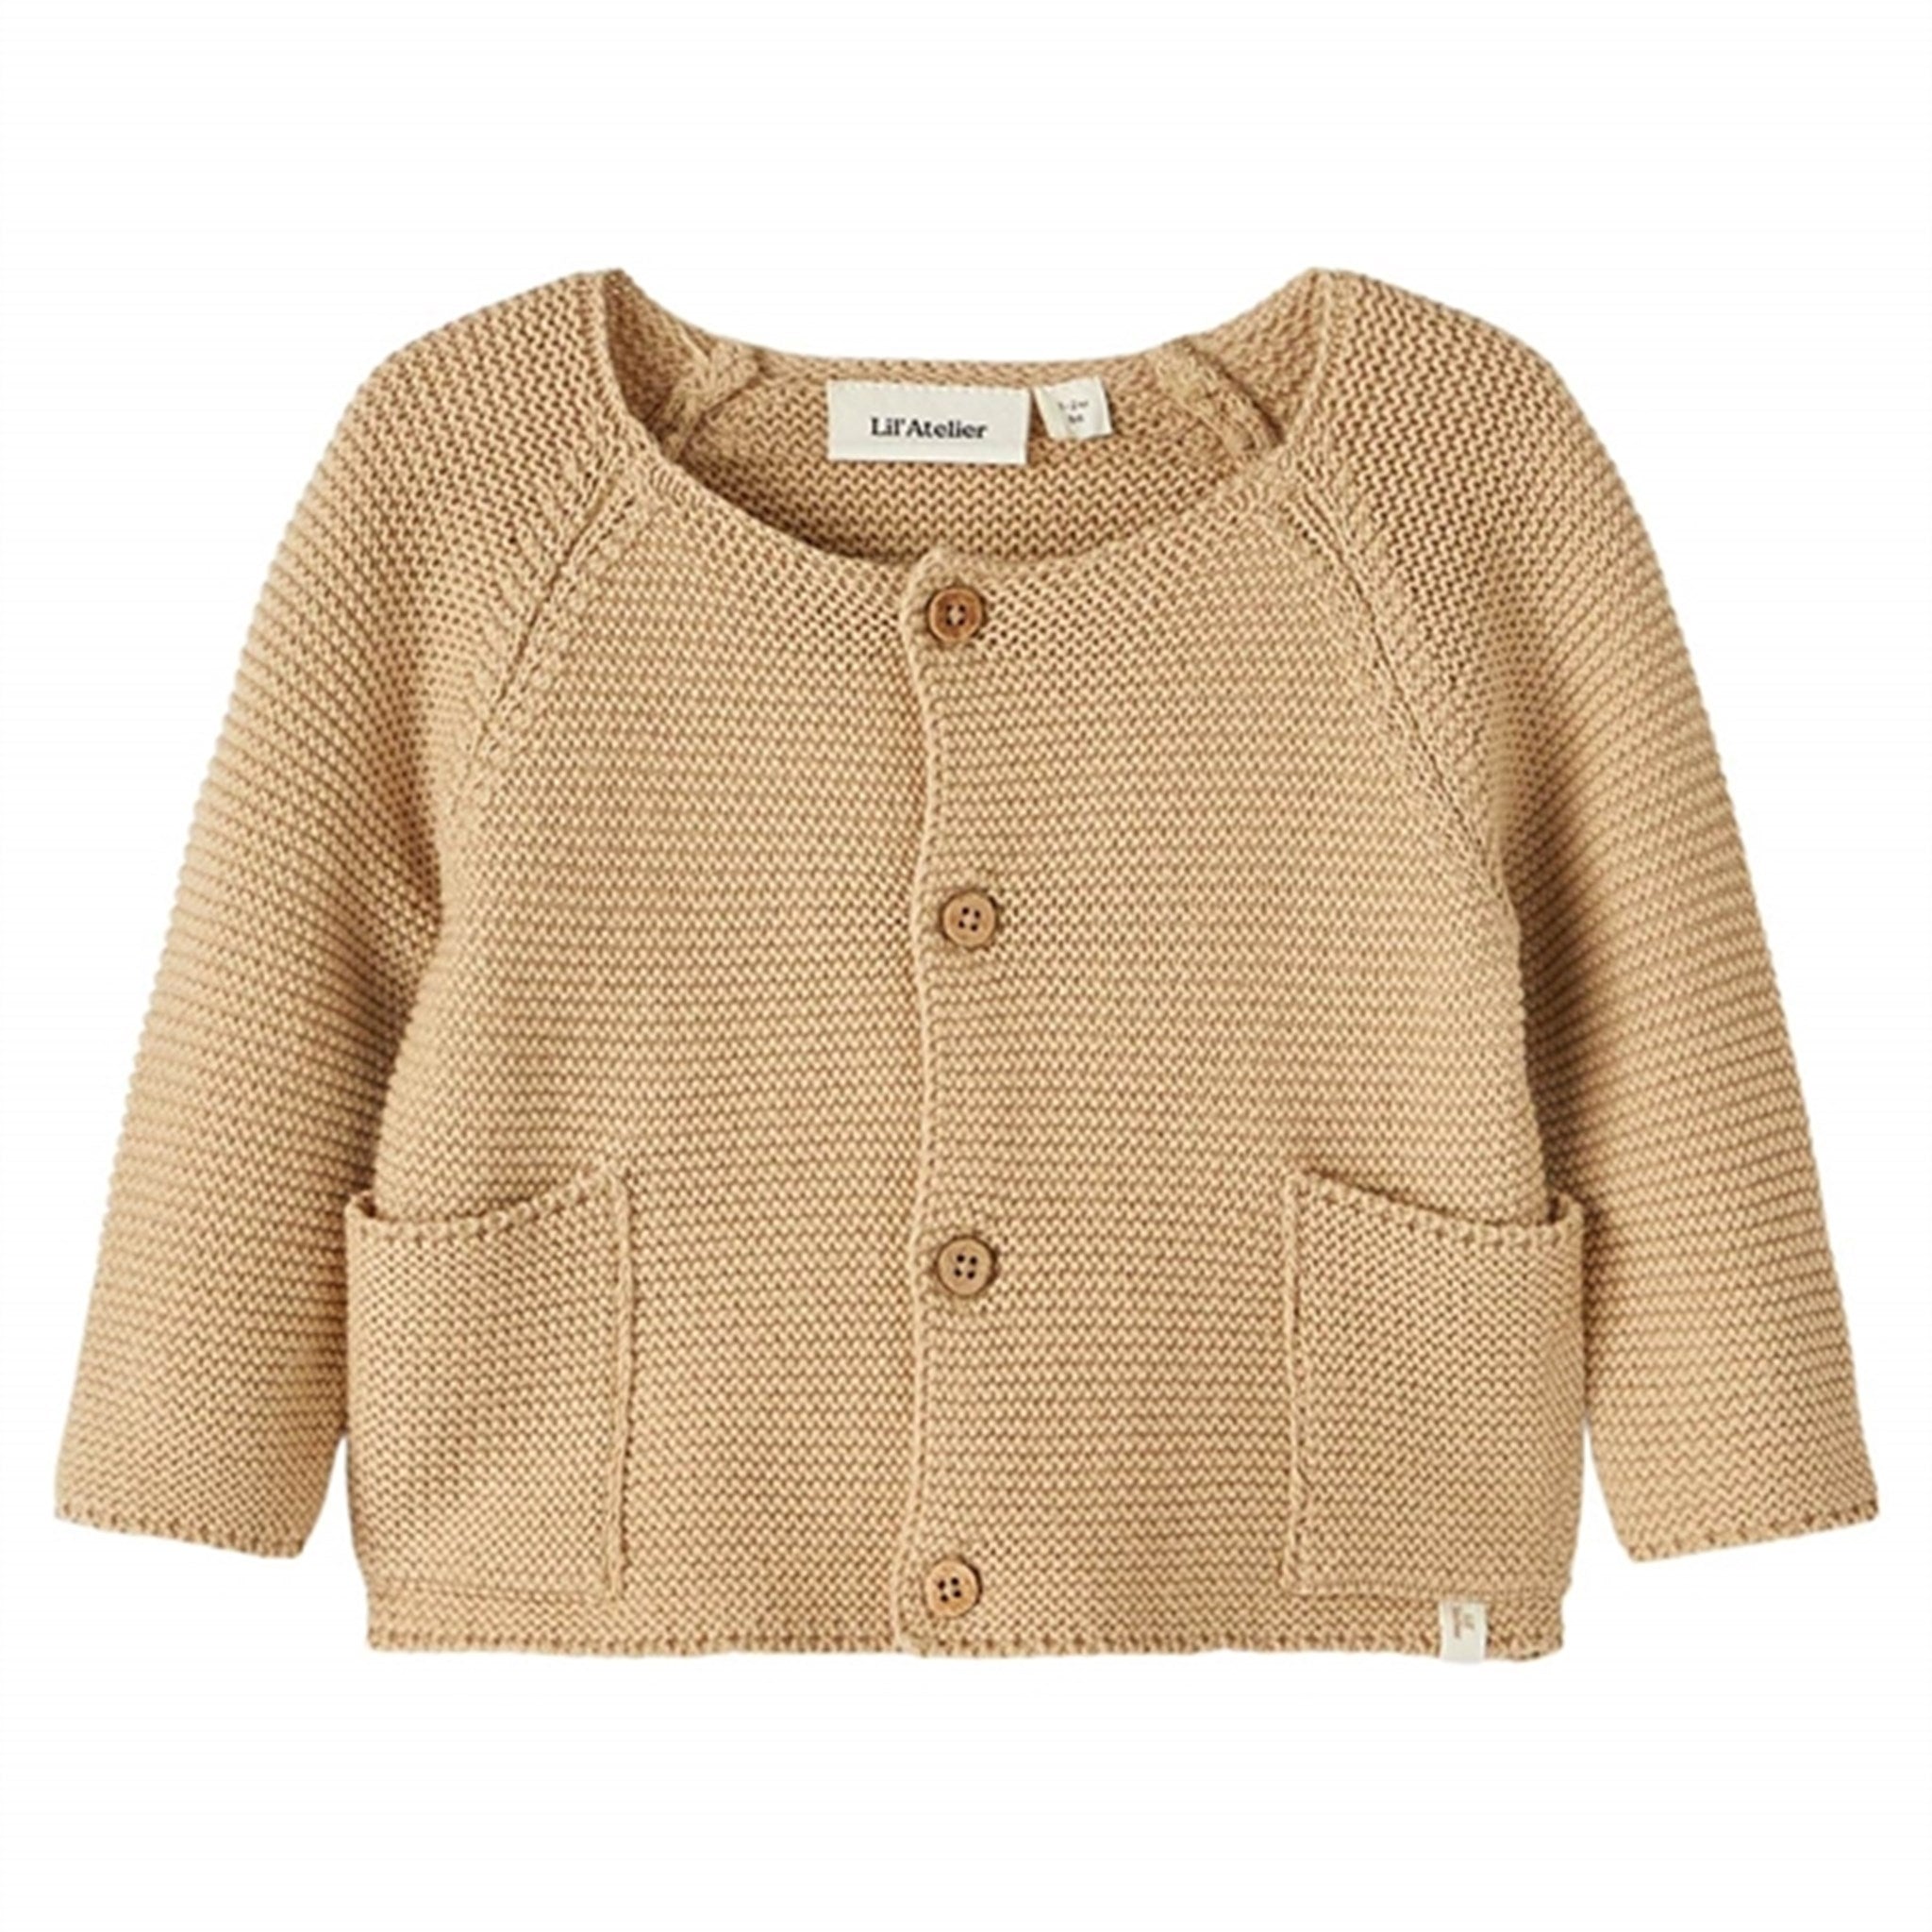 Lil' Atelier Curds & Whey Laguno Loose Knit Cardigan